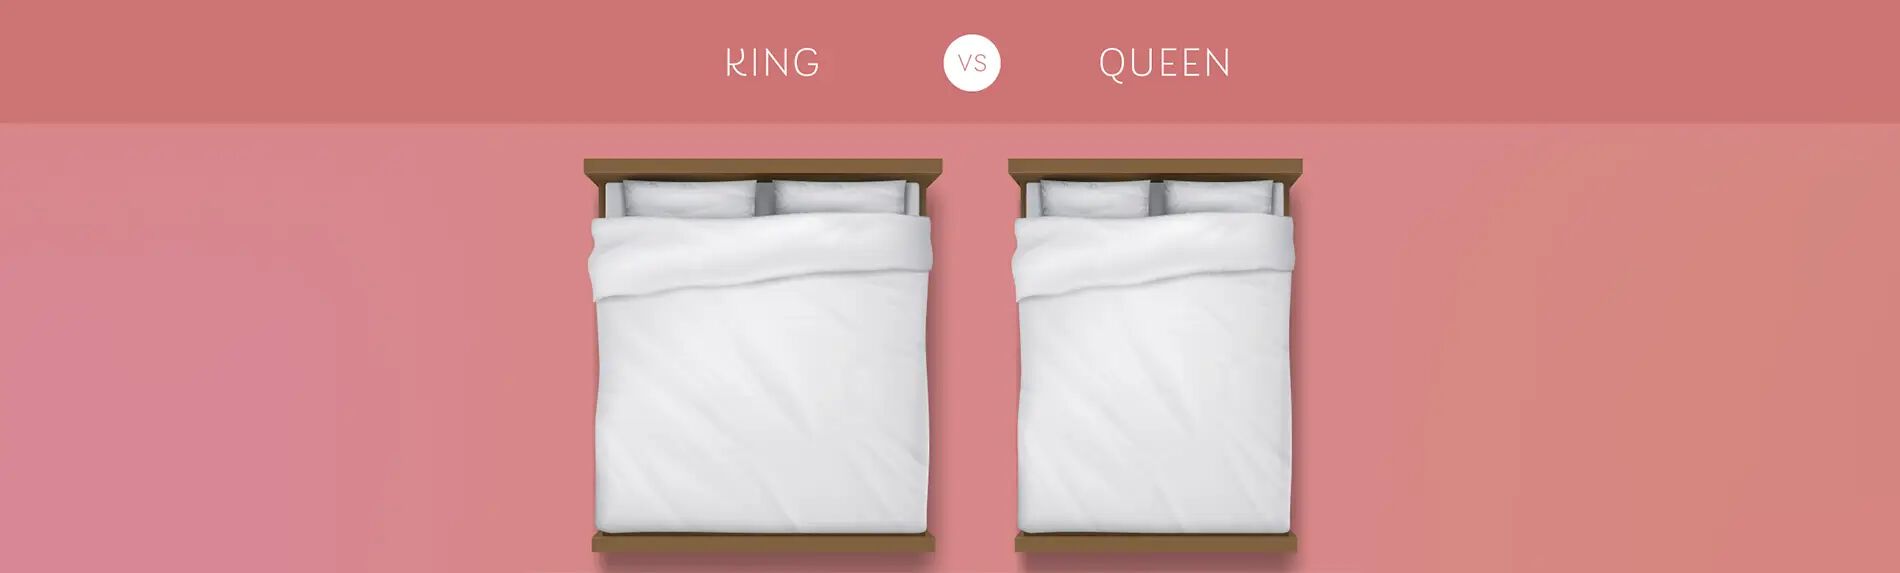 Understanding the difference between a King and Queen-sized mattress